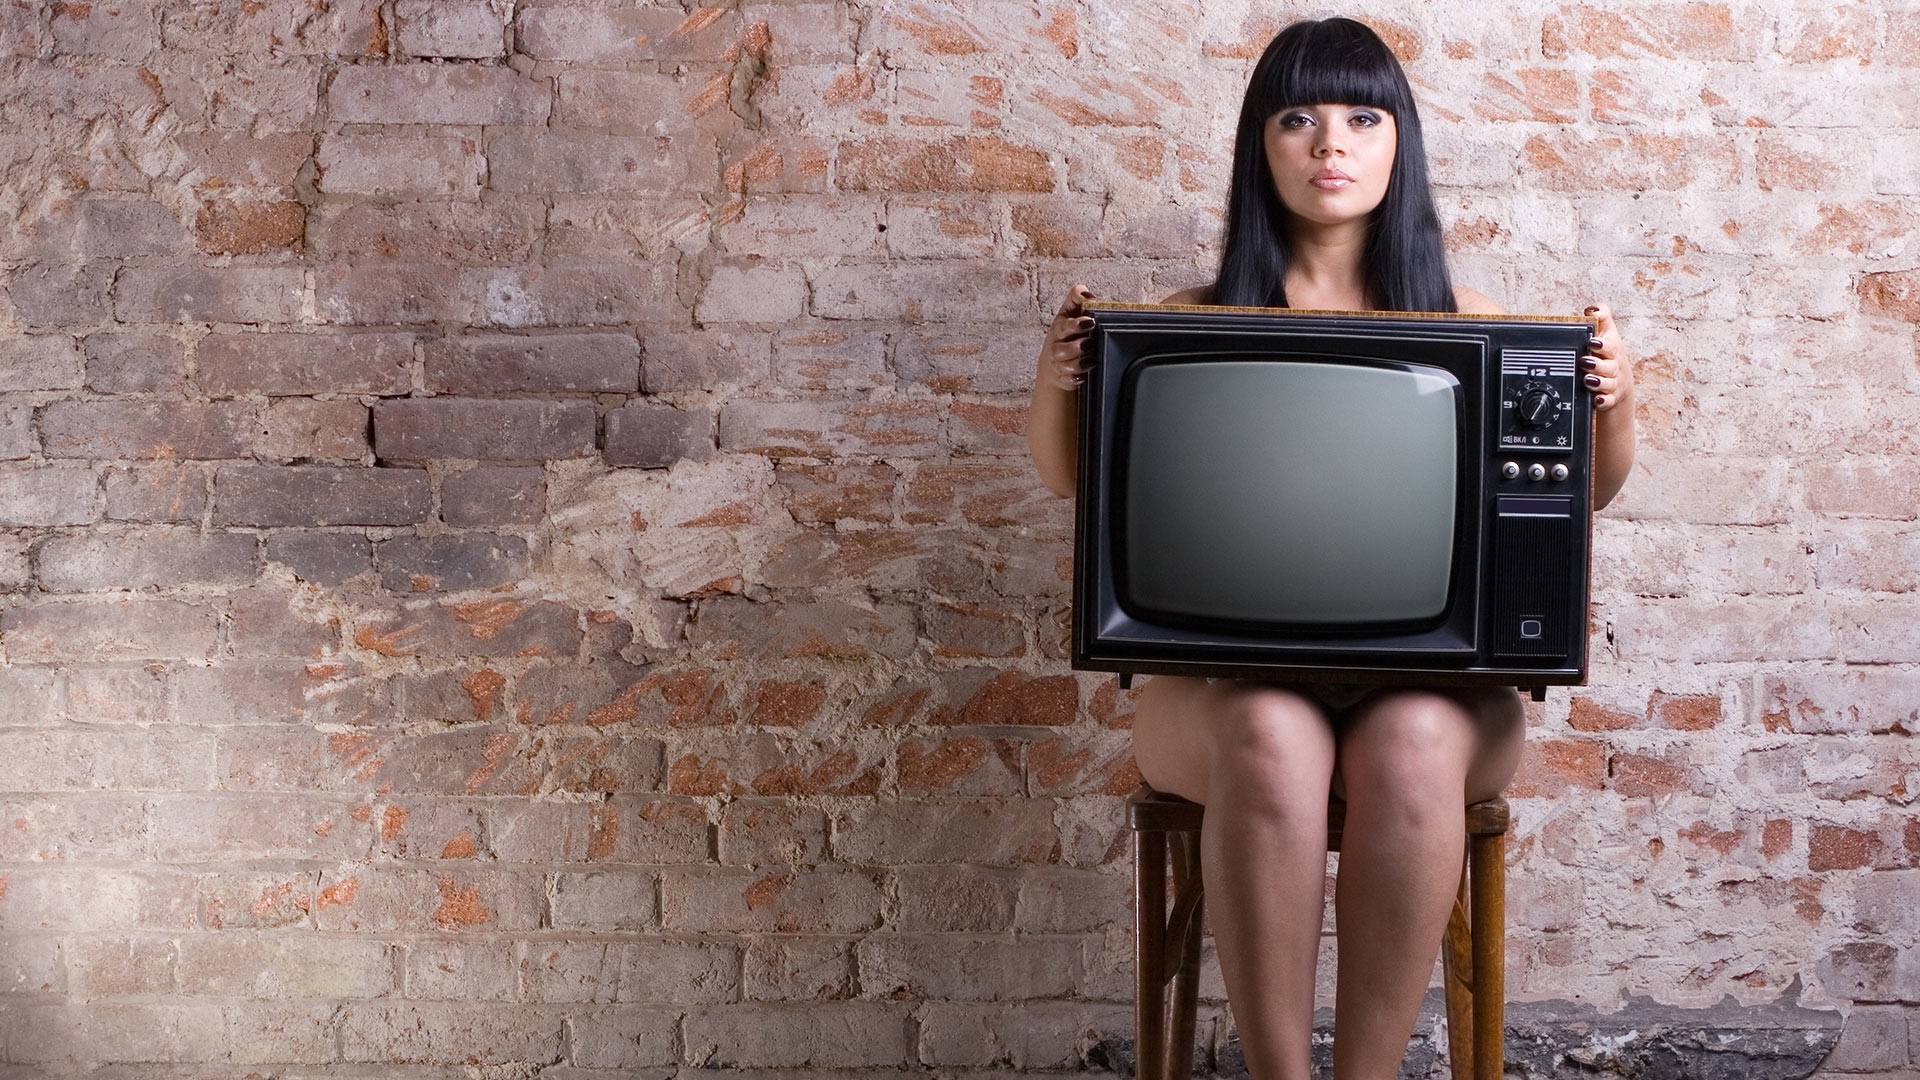 Naked black-haired woman sitting on a chair with an old TV on her lap covering her body. Brick wall background.